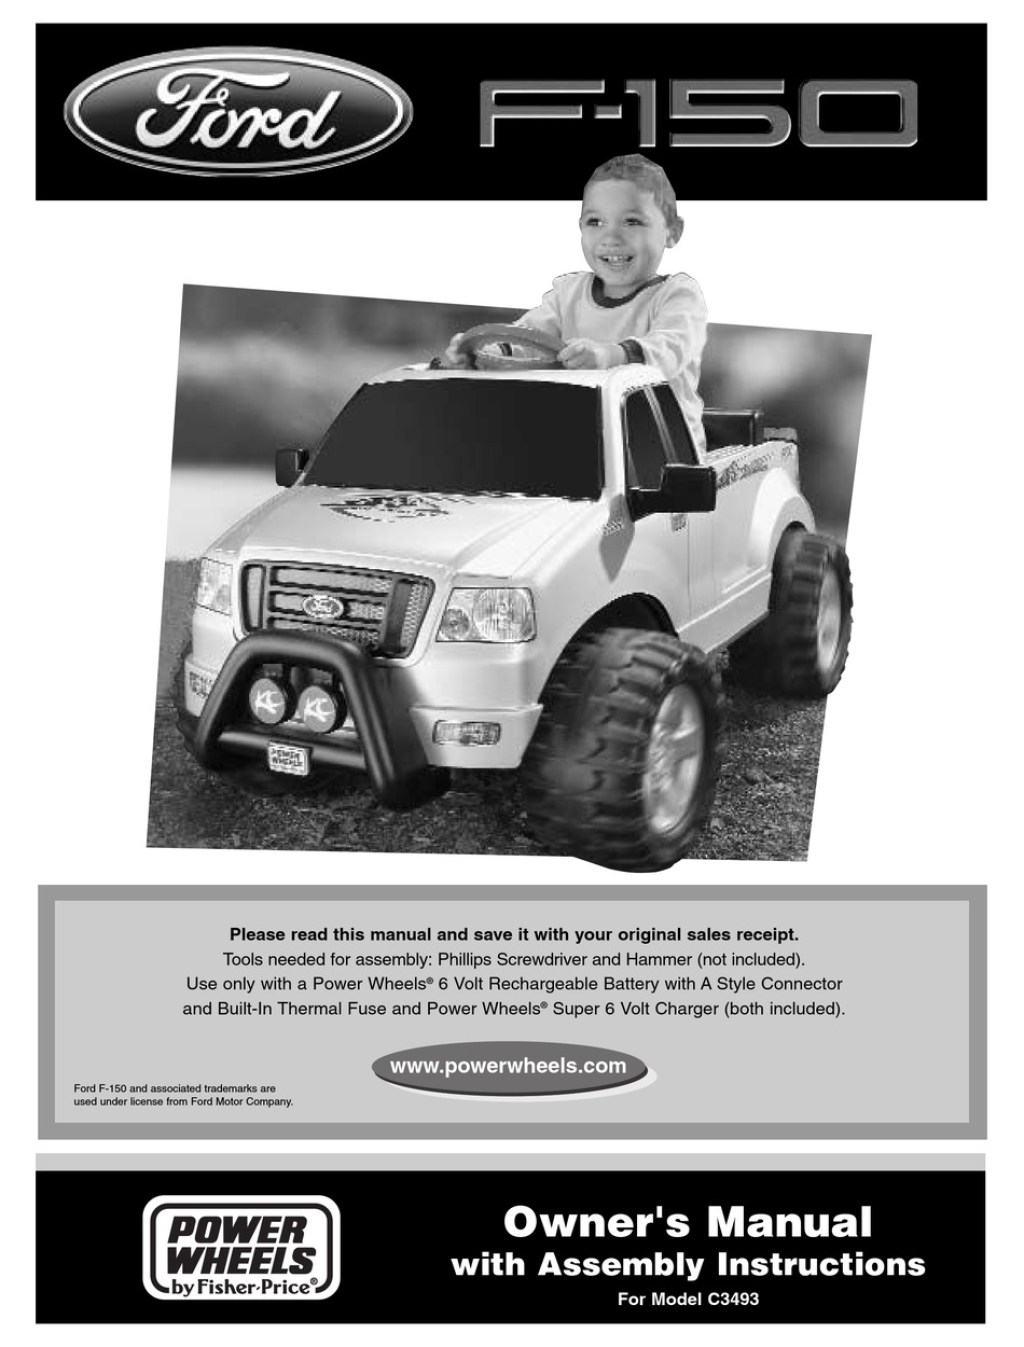 Picture of: POWER WHEELS FORD F- OWNER’S MANUAL WITH ASSEMBLY INSTRUCTIONS